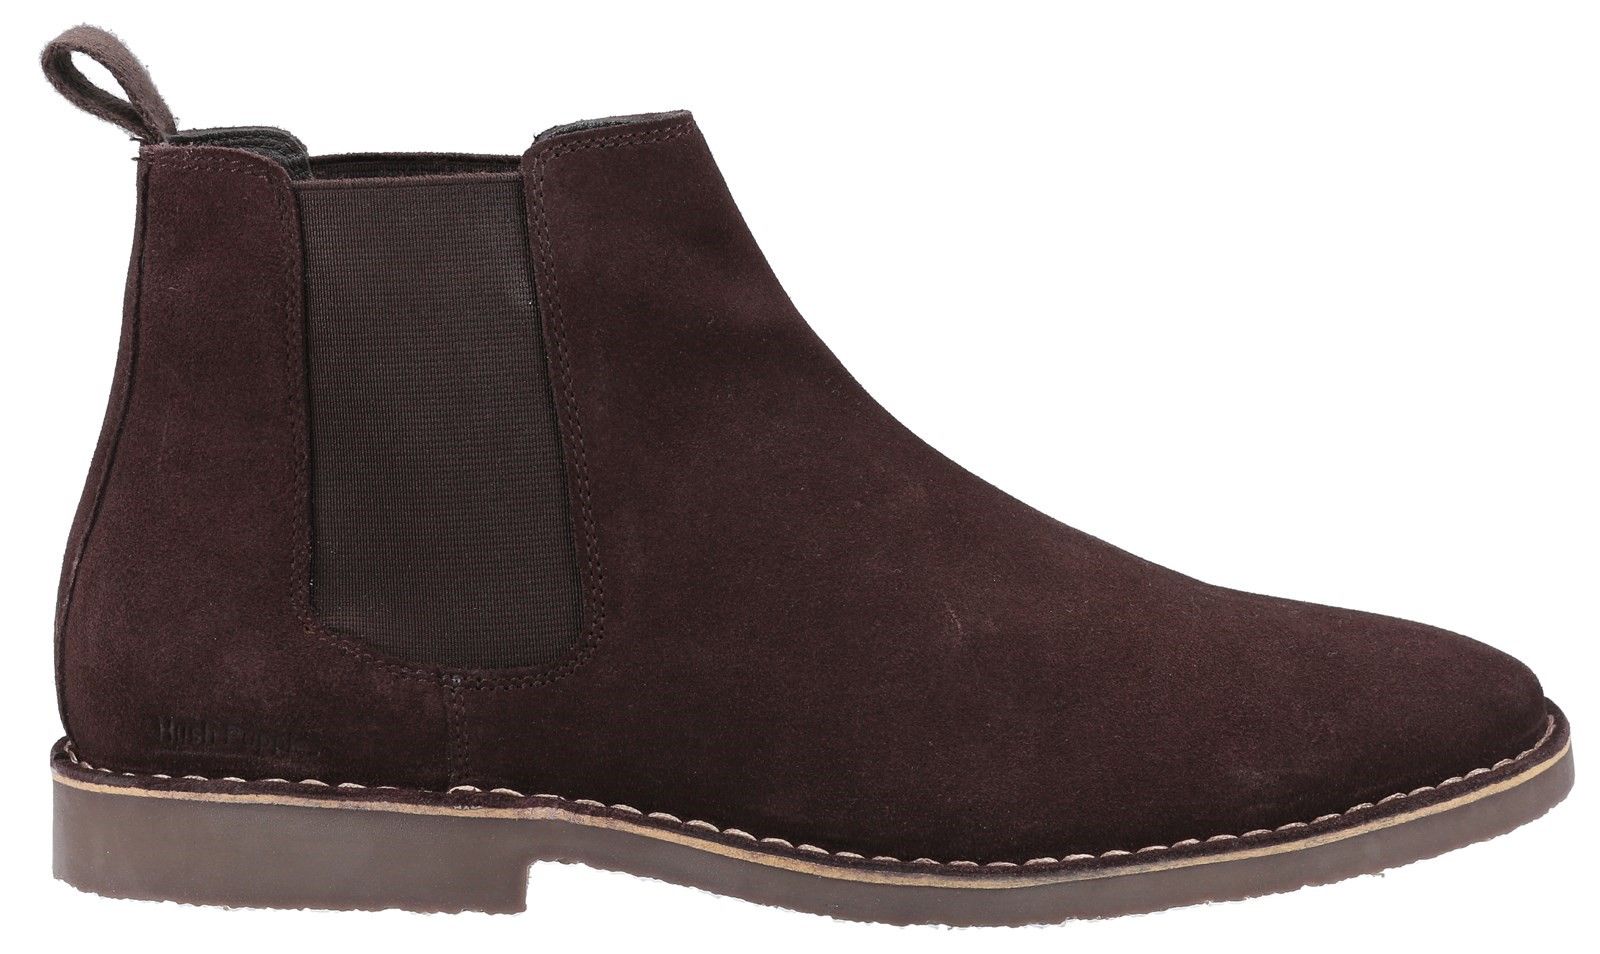 Men's Chelsea boot; Eddie is crafted with real suede leather and has a comfortable cushioned memory foam leather footbed. The flexible sole unit makes this the perfect smart all day footwear.Real suede upper. 
Pull on boot with double elastic gore and back tab. 
Leather and textile lining. 
Memory foam leather sock. 
Flexible and lightweight gum unit.